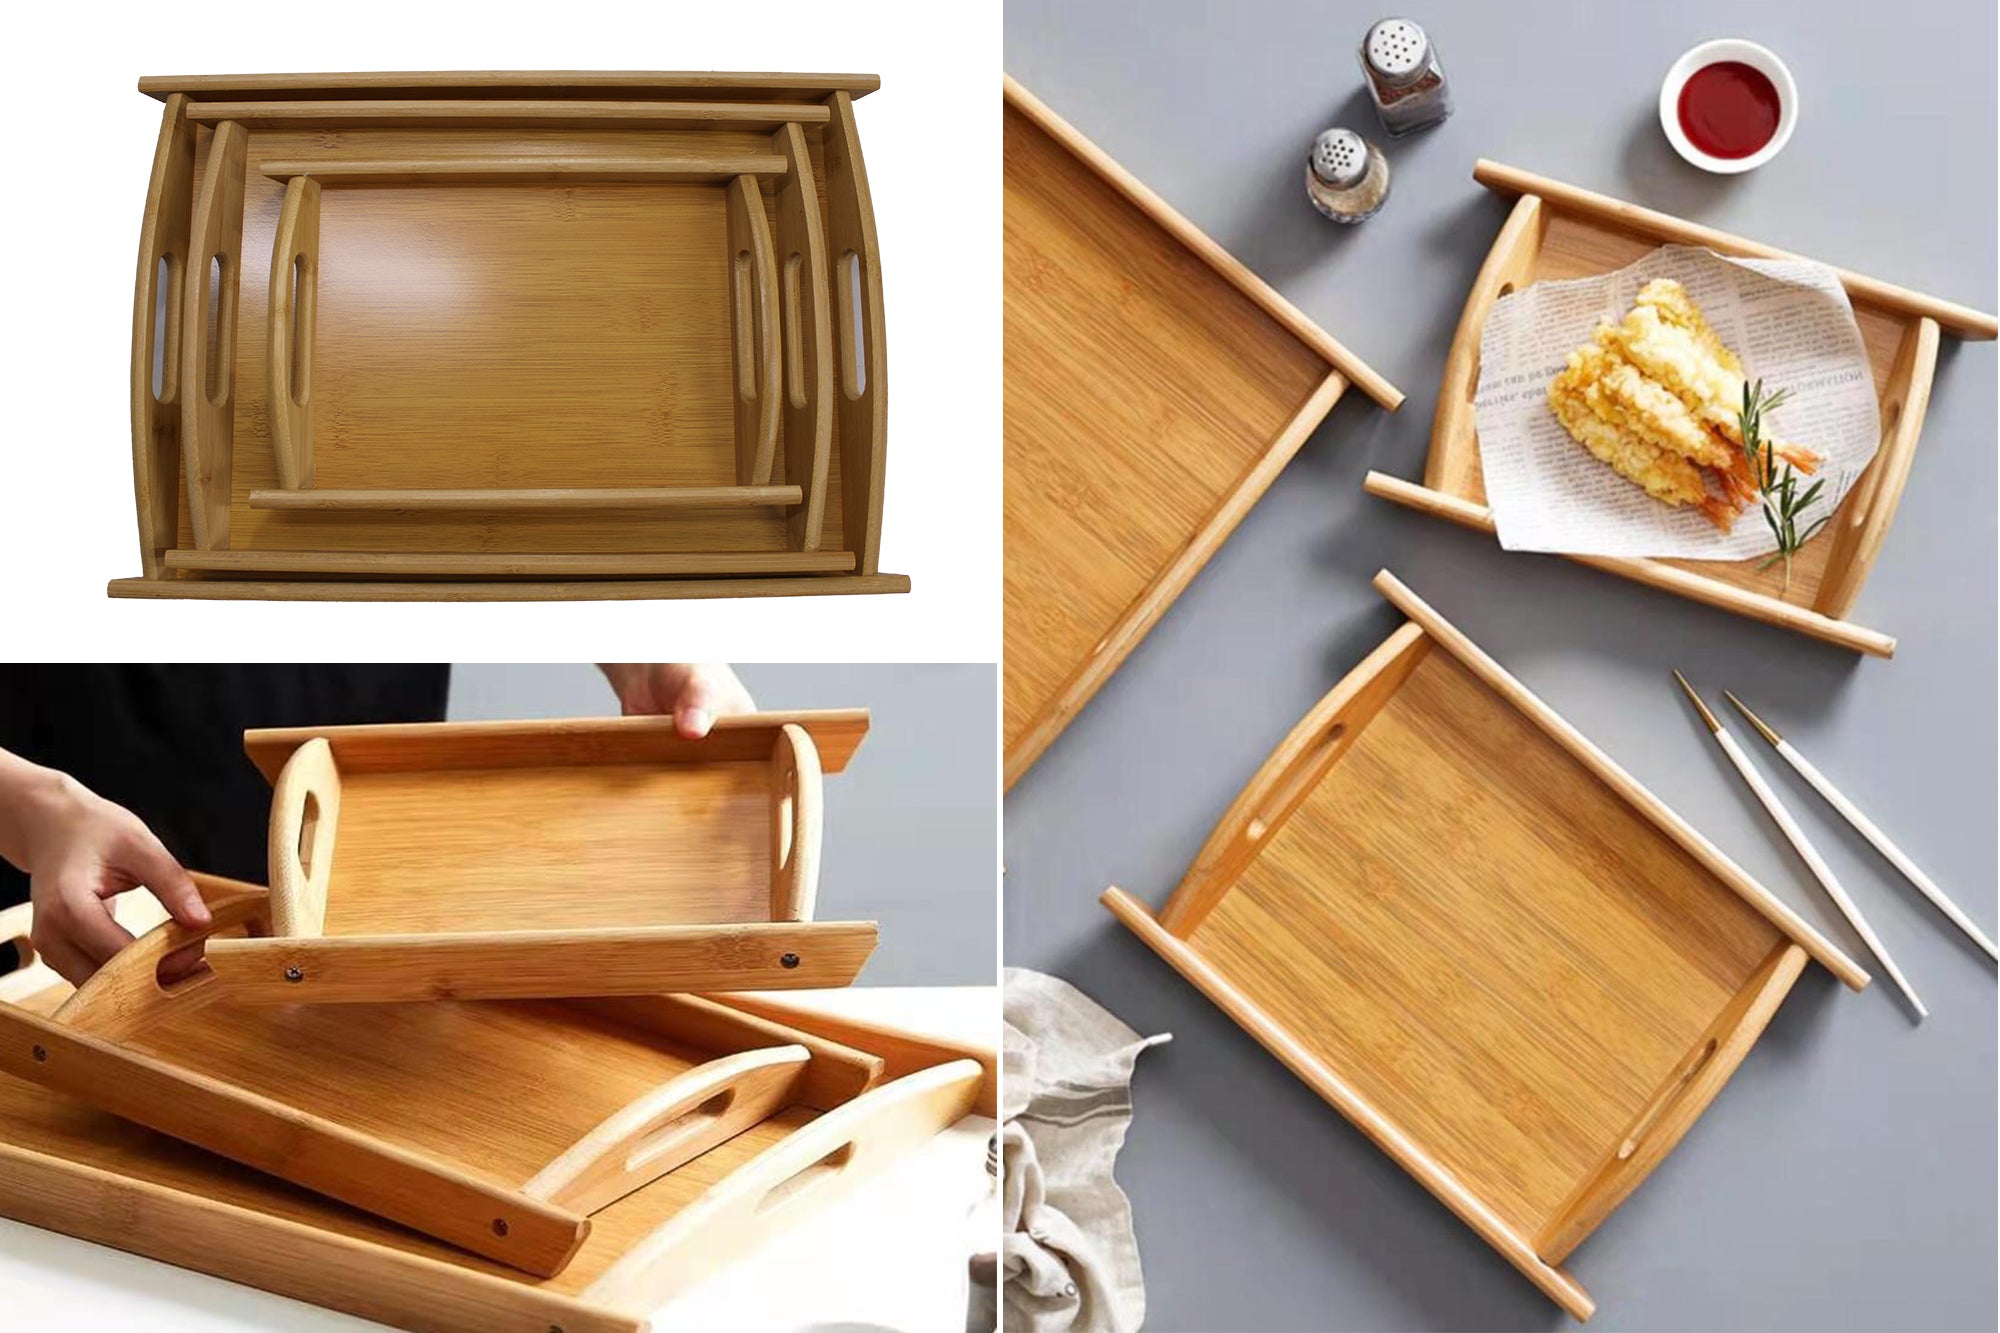 3 Piece Bamboo Serving Tray with Handle Set - 40 x 30, 36 x 26 and 29 x 19cm